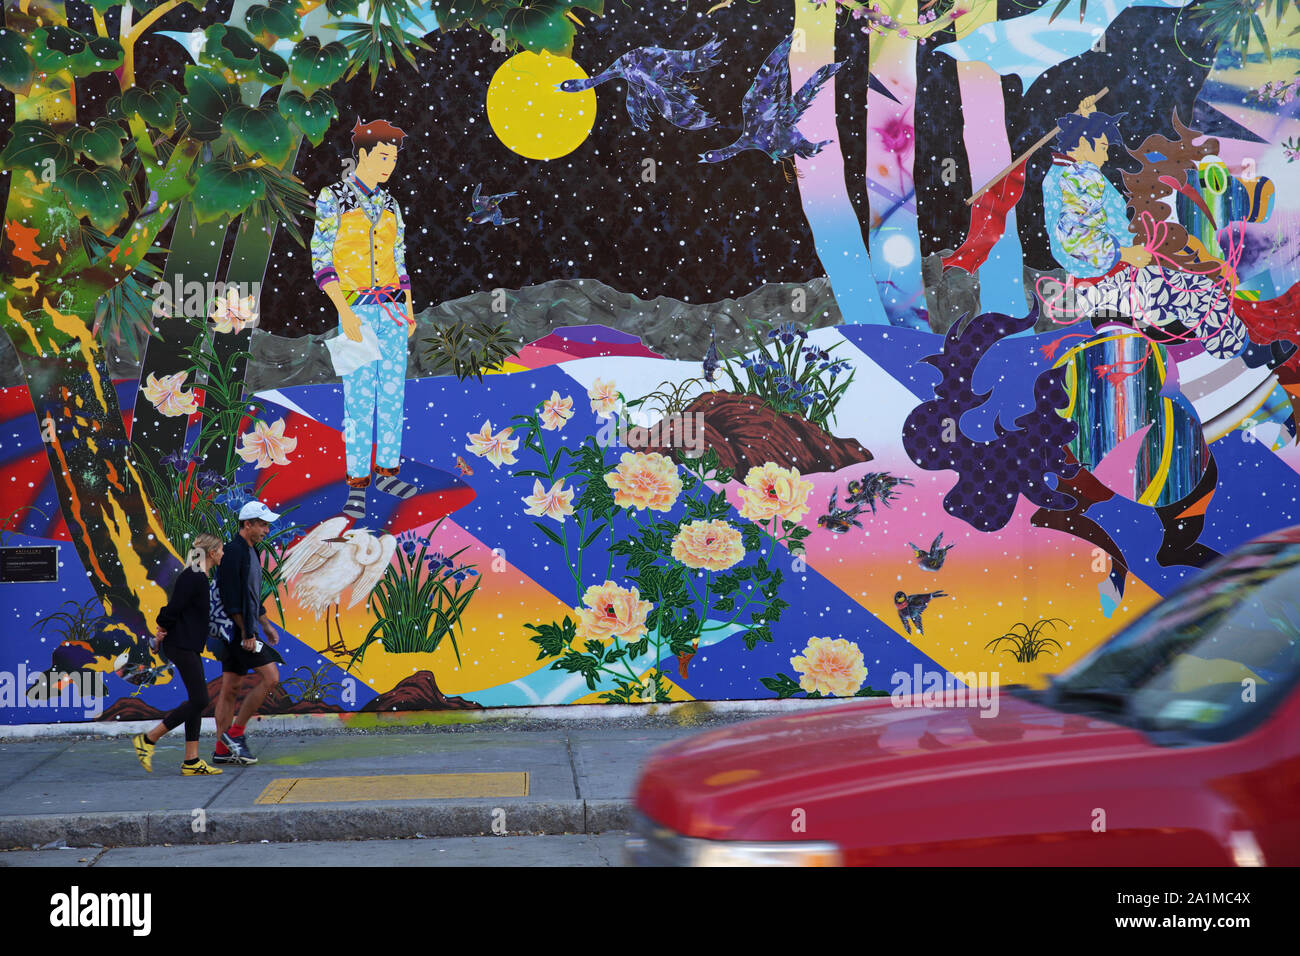 New York, NY USA - September 27, 2019: View of the fine art painting by Tomokazu Matsuyama on the Bowery Mural Wall at the corner of Houston Street an Stock Photo